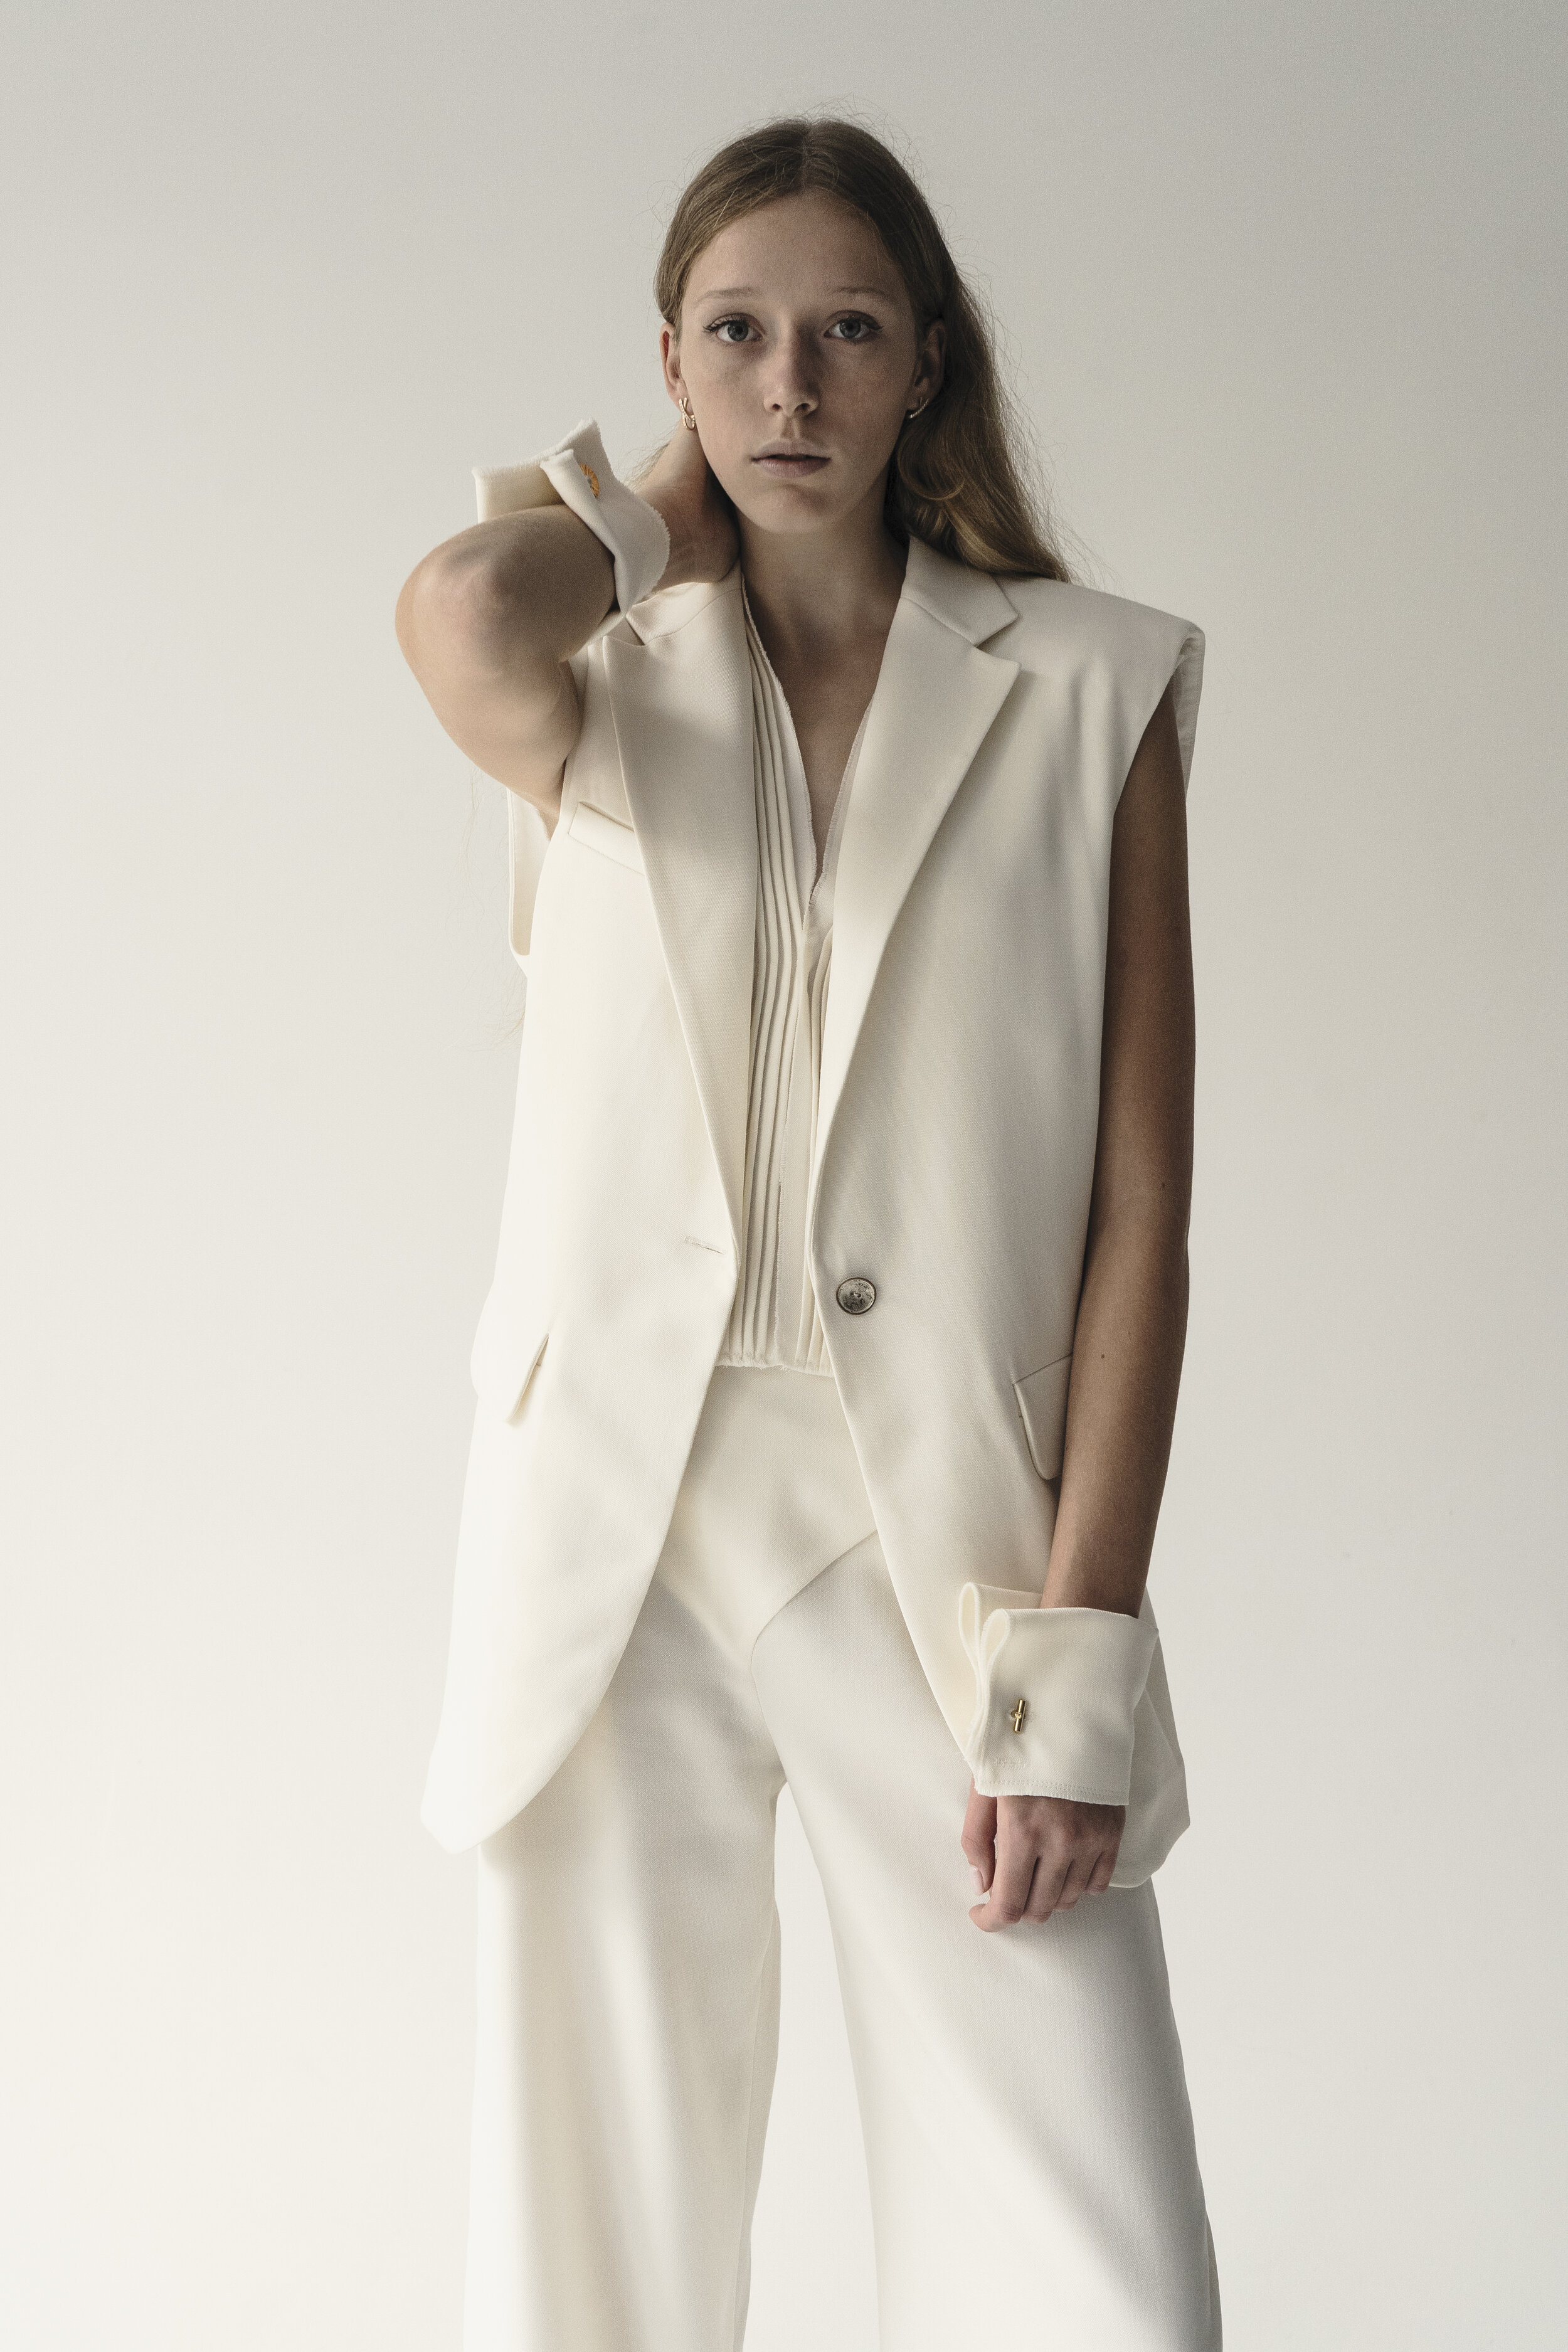 CREAM WOOL MARRY ME SLEVELESS JACKET — K M by L A N G E